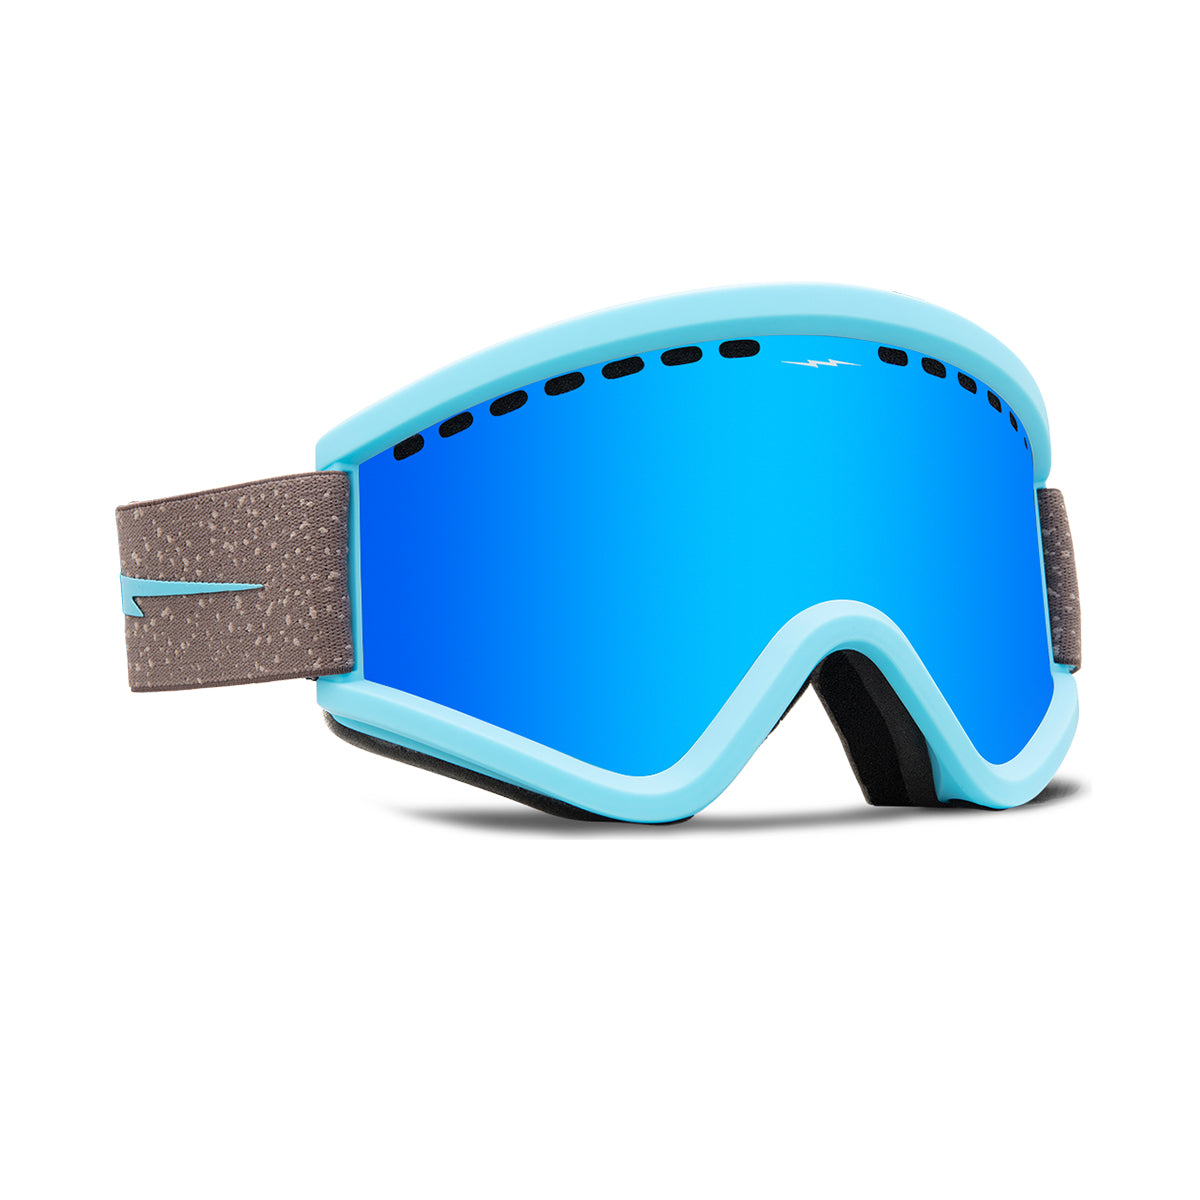 ELECTRIC EGV.K YOUTH SNOWBOARD GOGGLES - DELPHI SPECKLE